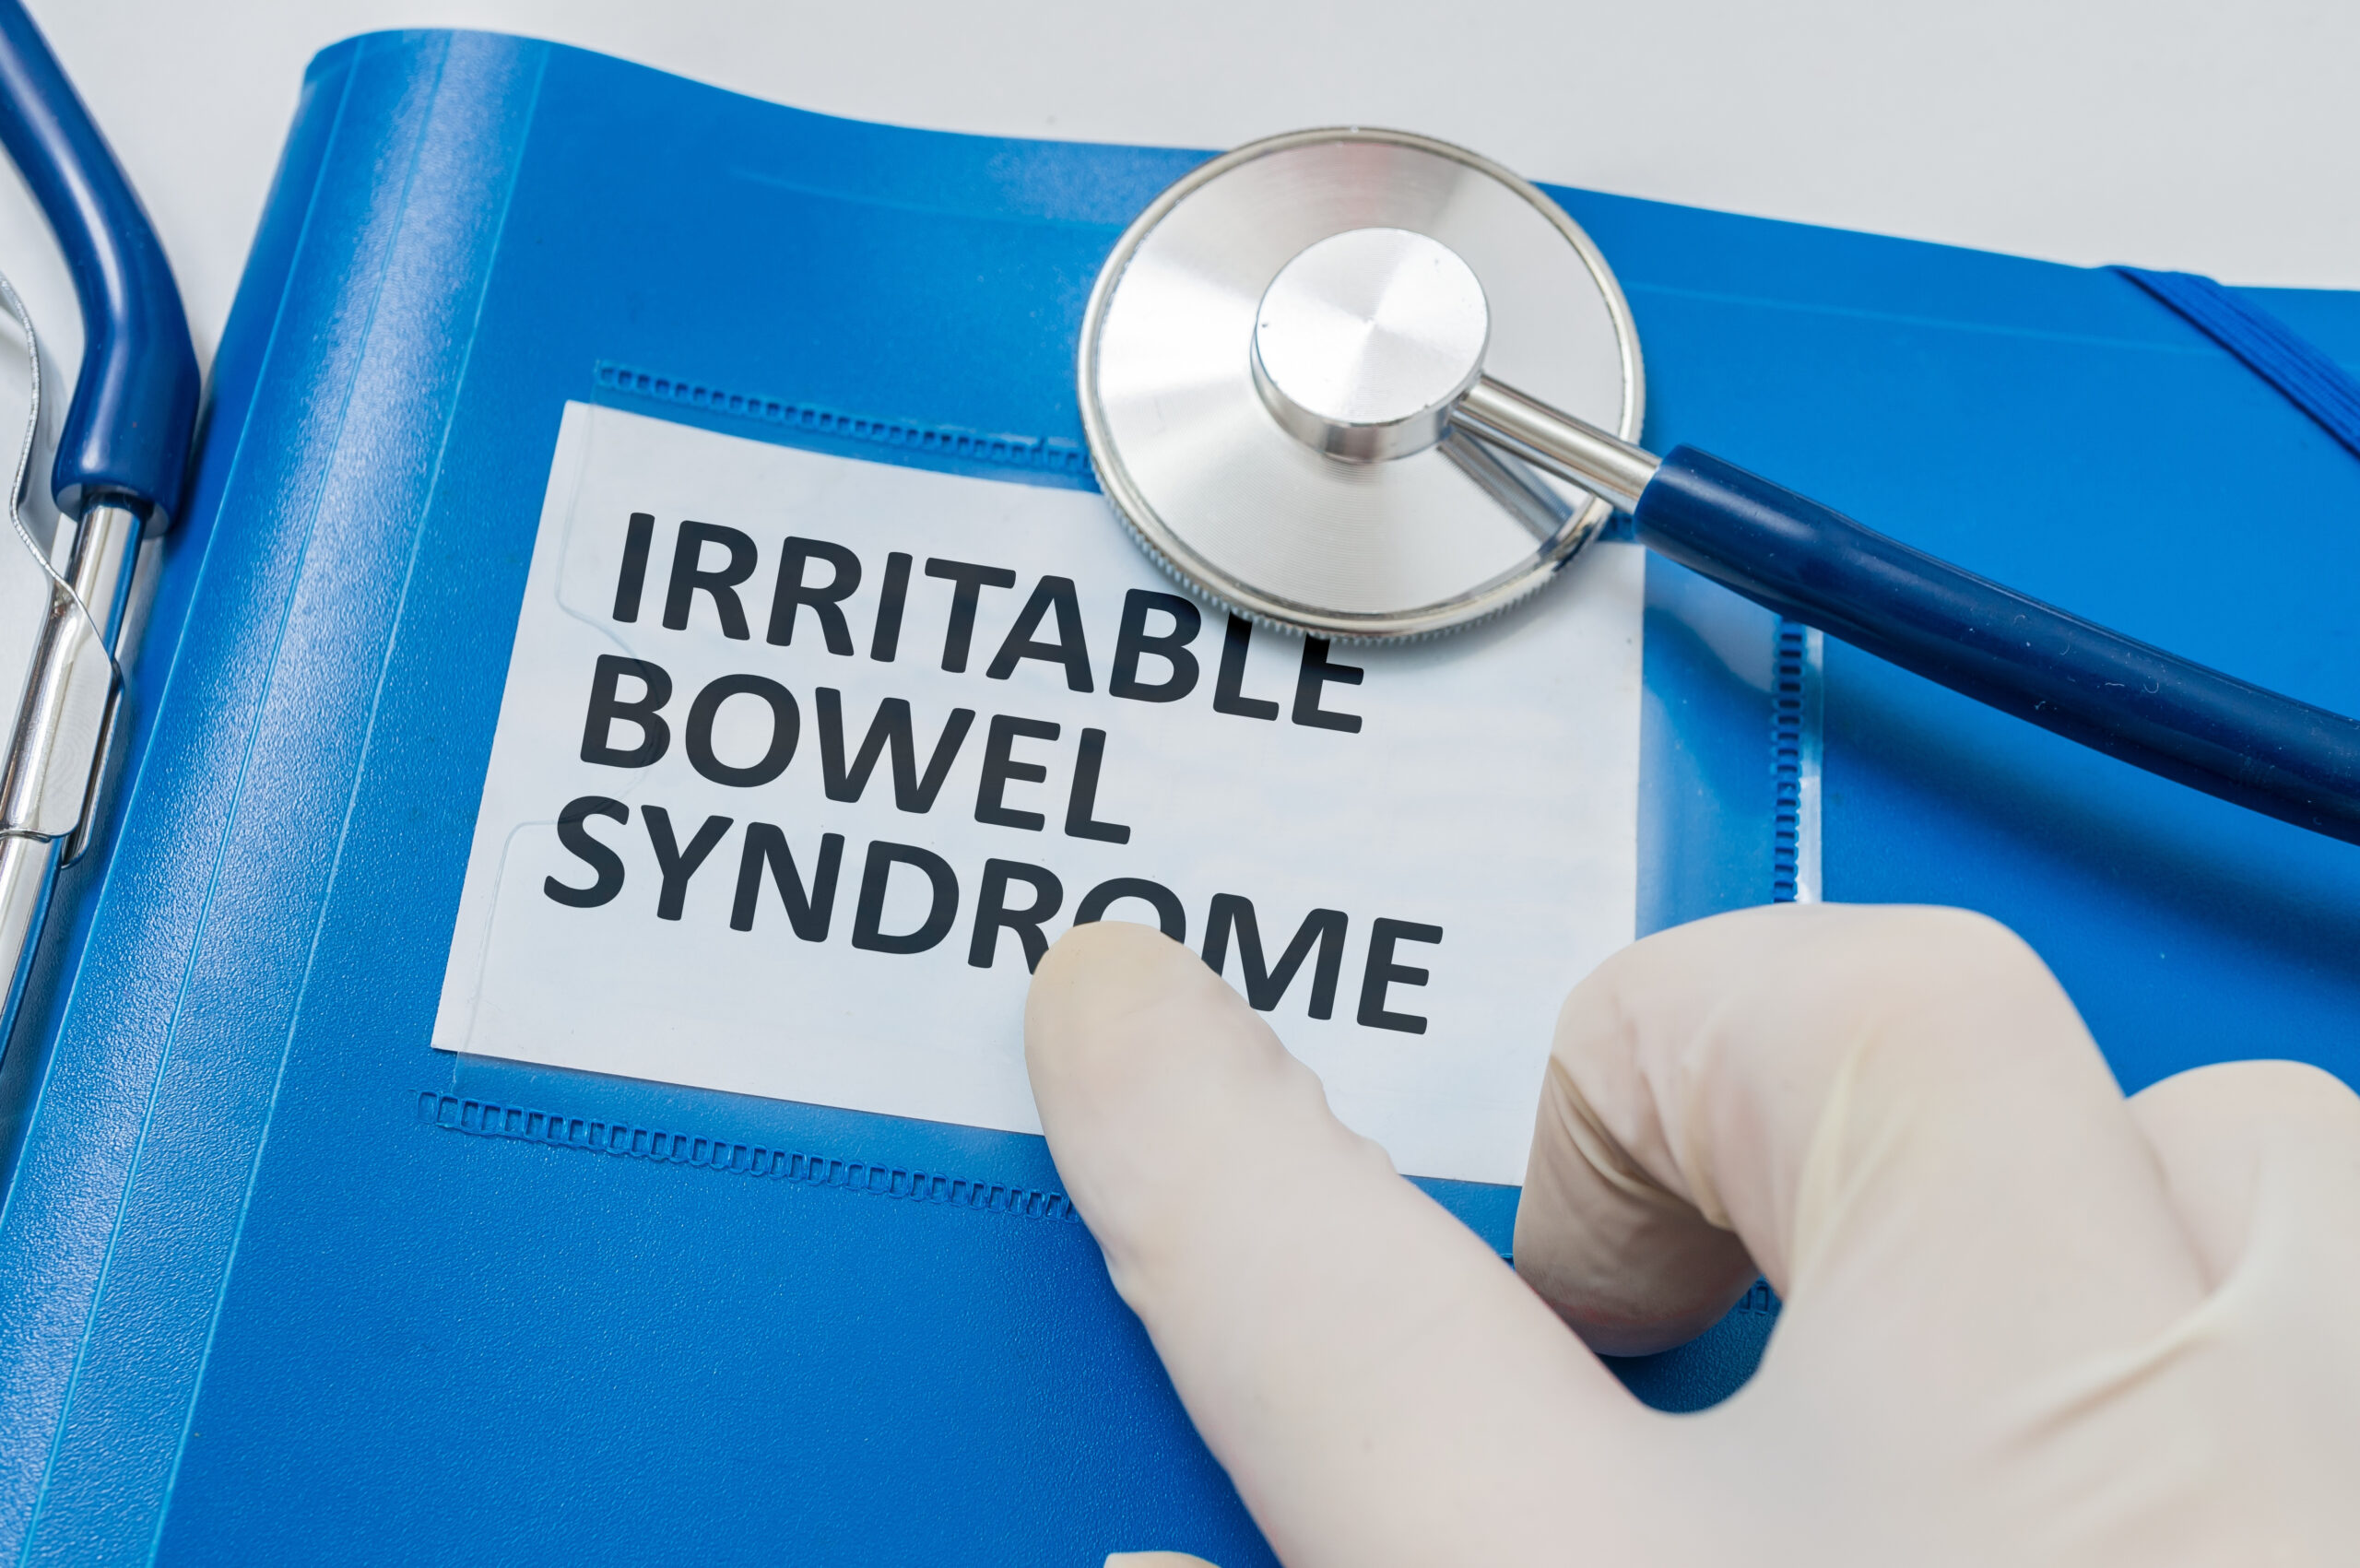 Efficacy Of Cannabis For Treating Irritable Bowel Syndrome